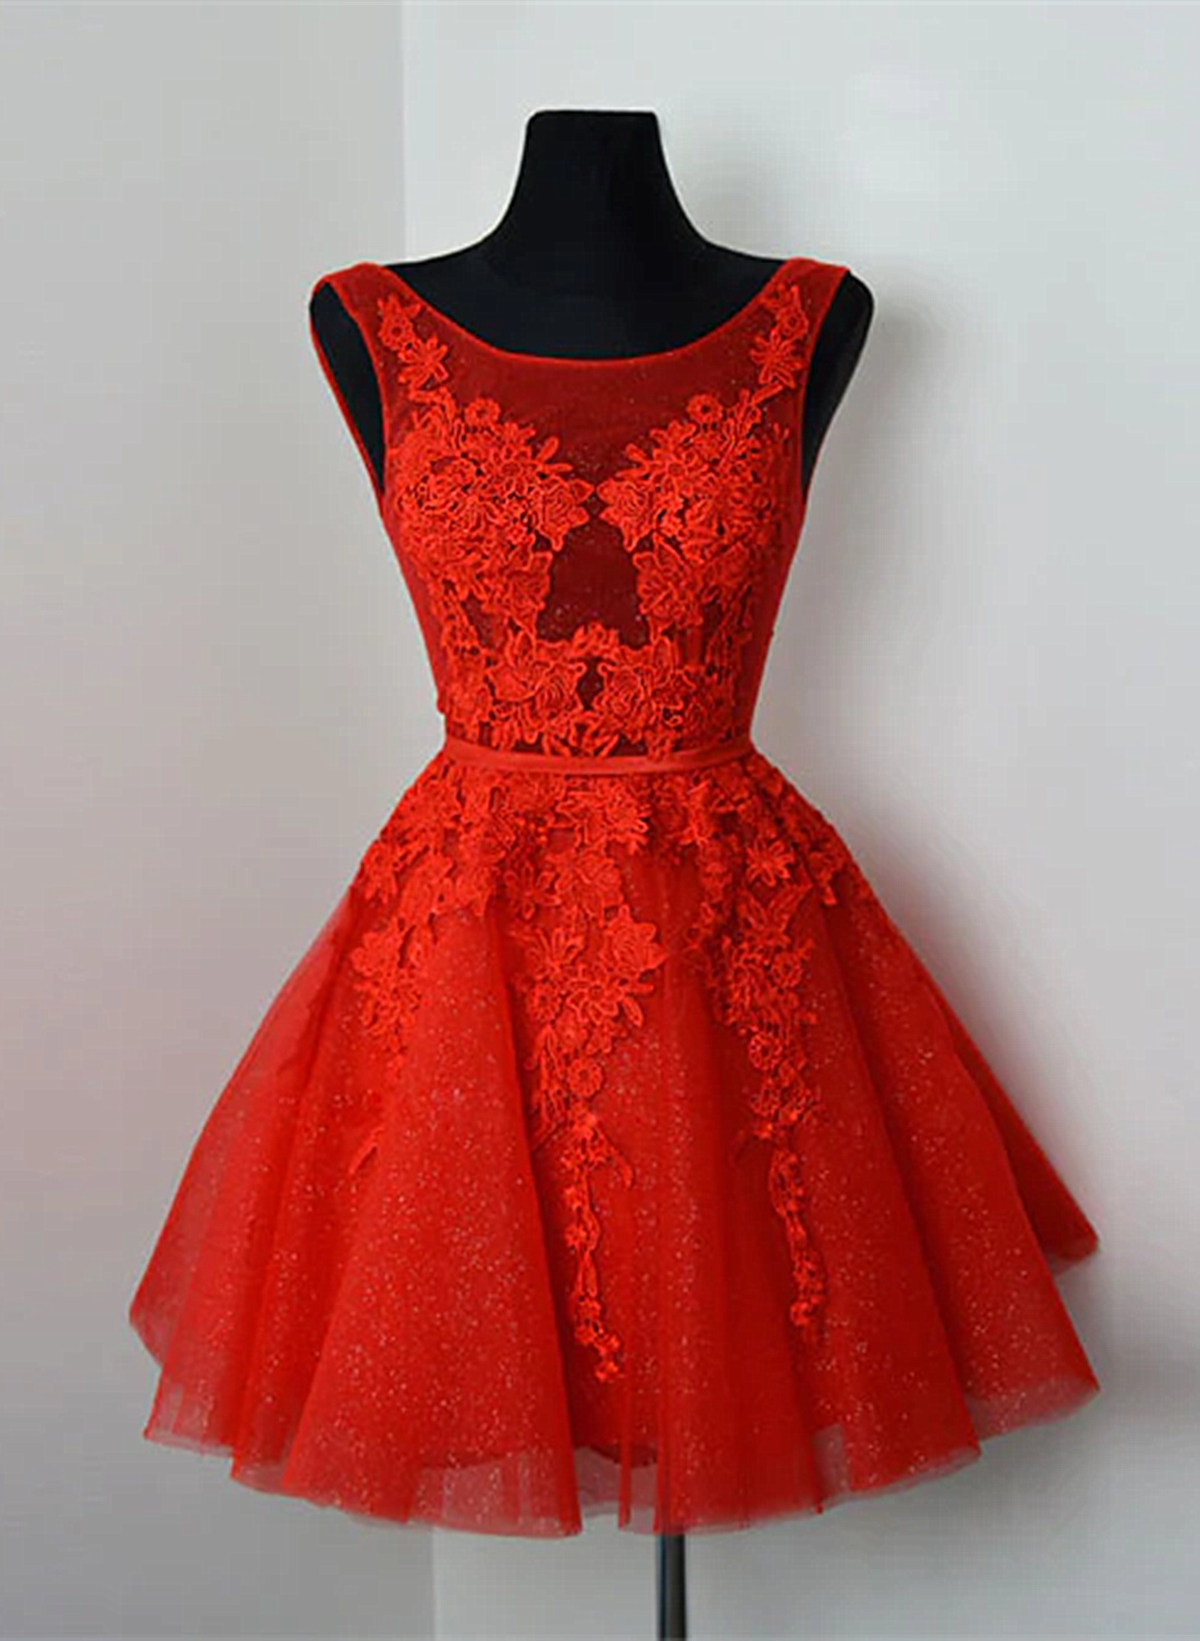 Red Lace Round Neckline Short Party Dress, Red Short Corset Homecoming Dress outfit, Formal Dress Short